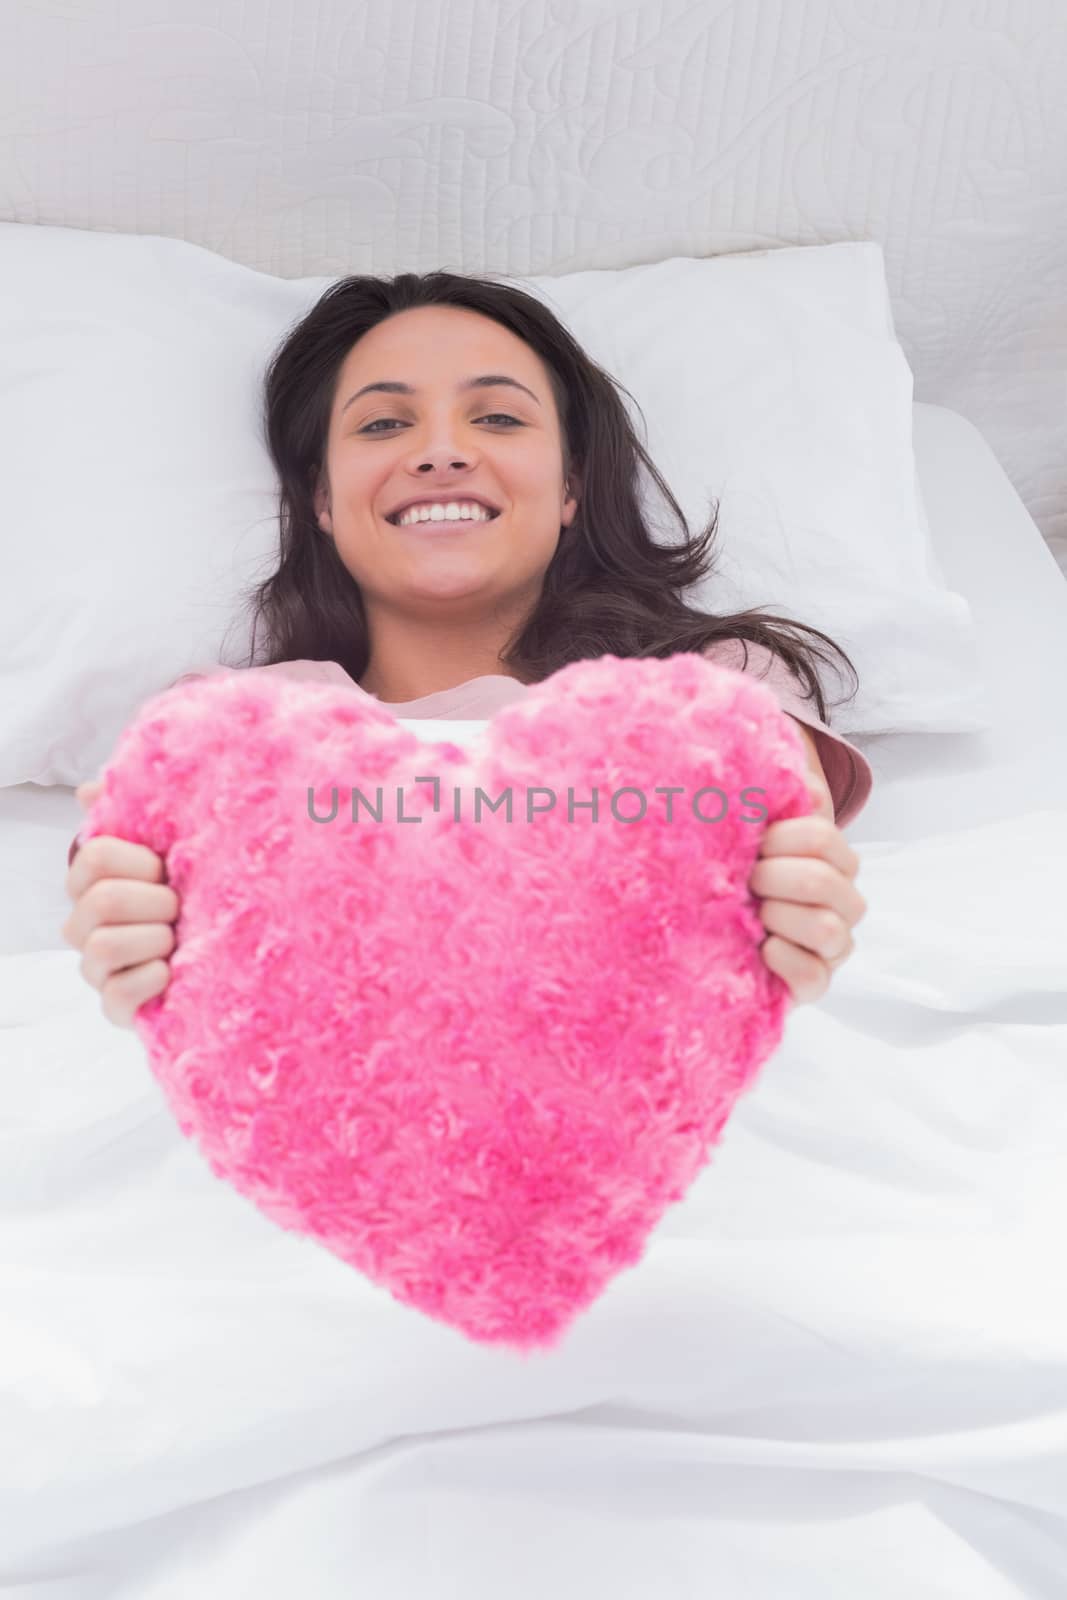 Woman lying in her bed and holding a fluffy heart cushion by Wavebreakmedia